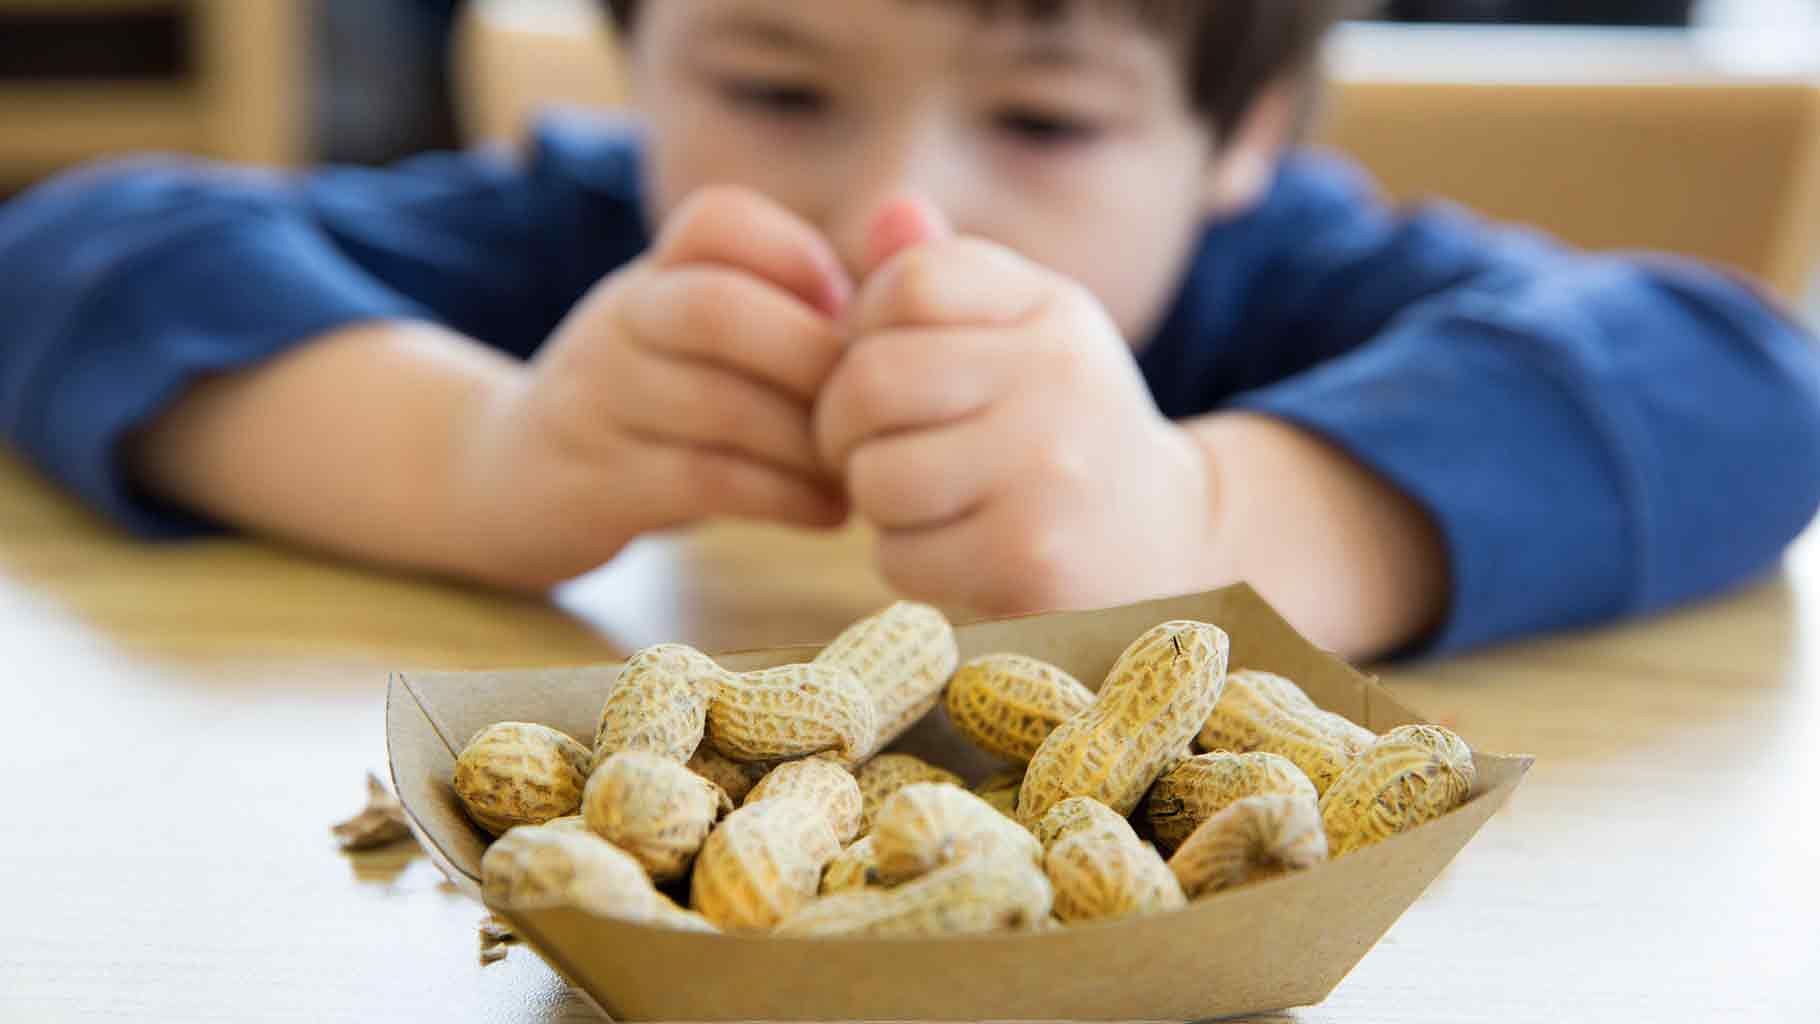 Peanut allergies can lead to severe reactions like anaphylaxis, which can be life-threatening if not treated immediately.&nbsp;